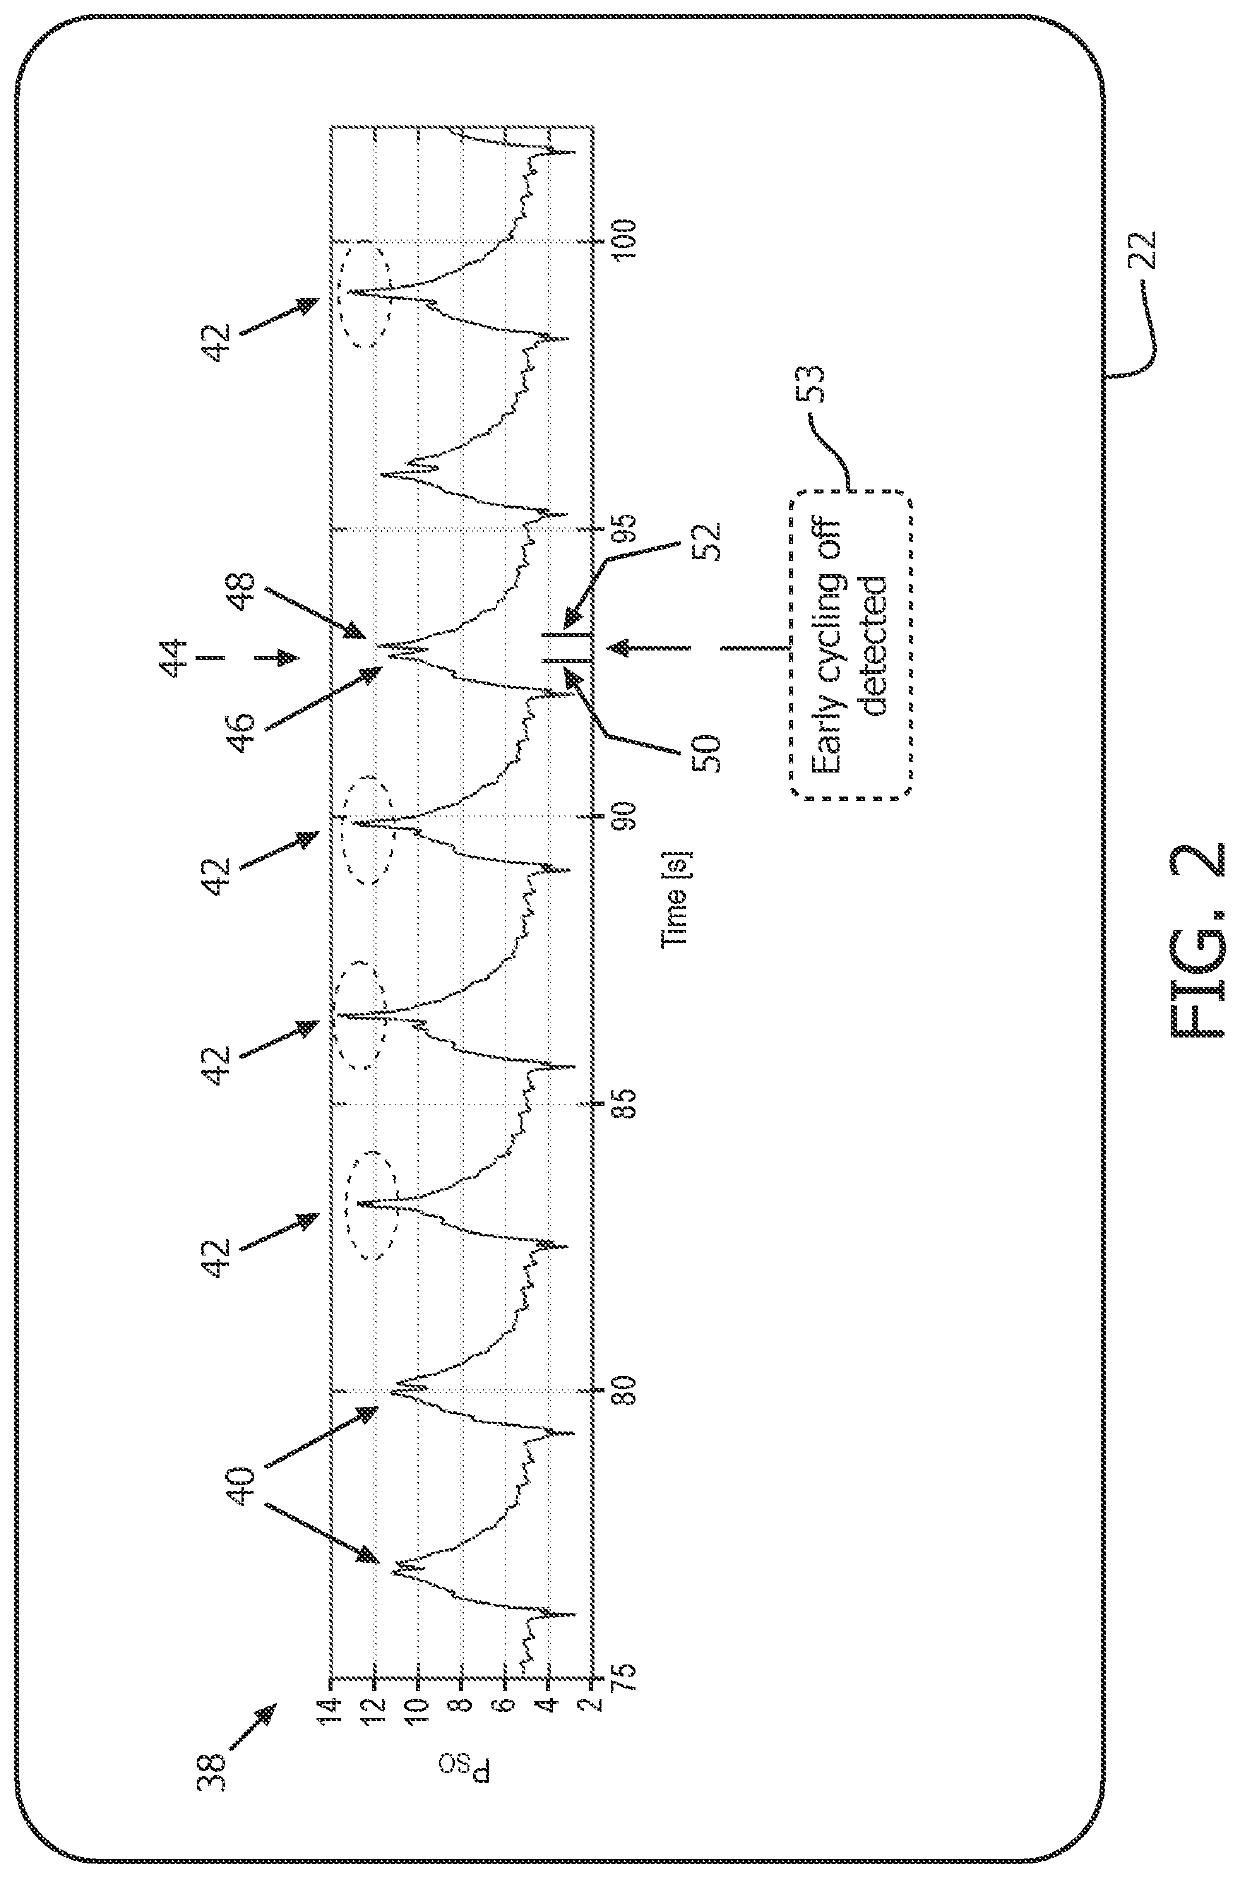 Anomaly detection device and method for respiratory mechanics parameter estimation